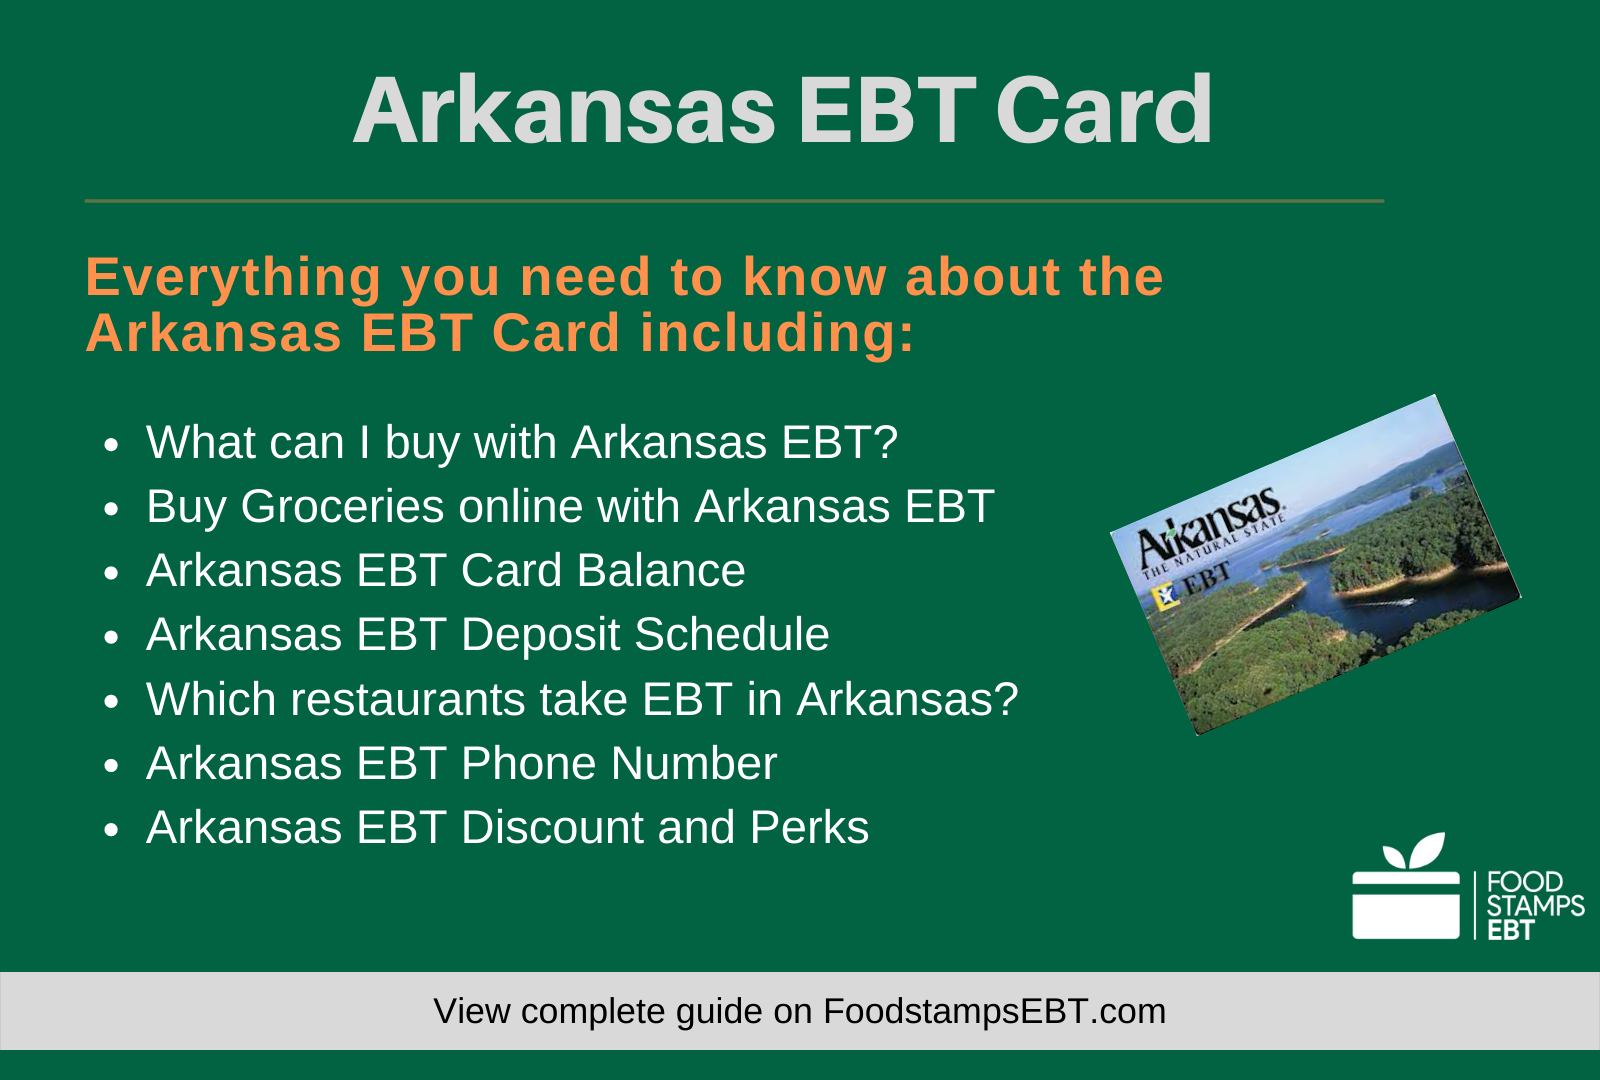 "Arkansas EBT Card Questions and Answers"